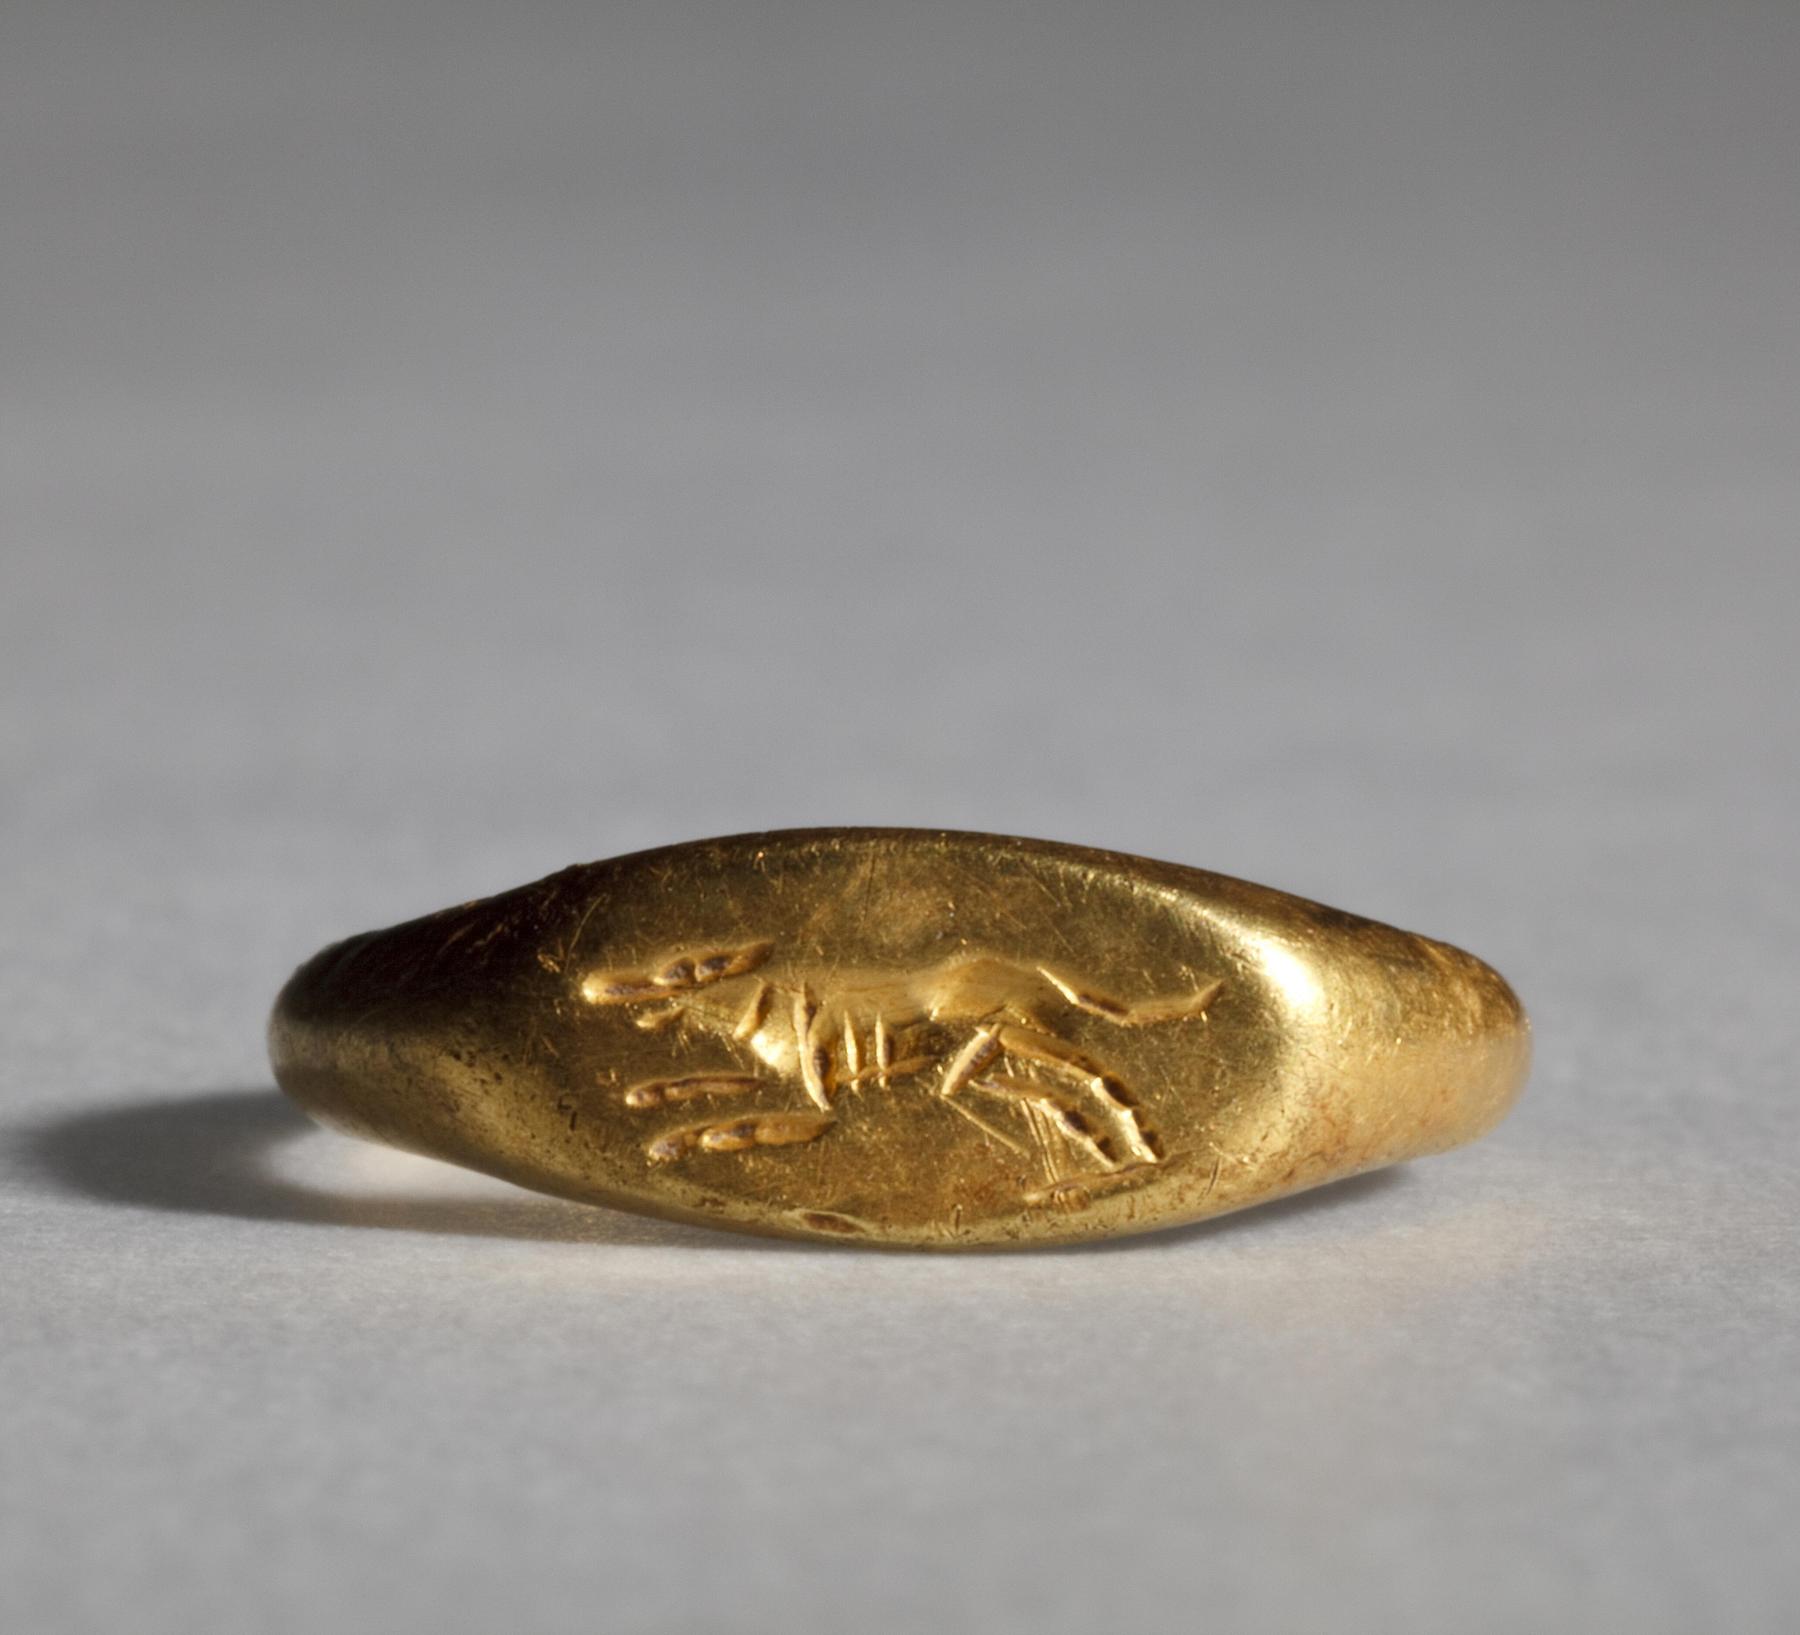 Finger ring with a running dog, H1813